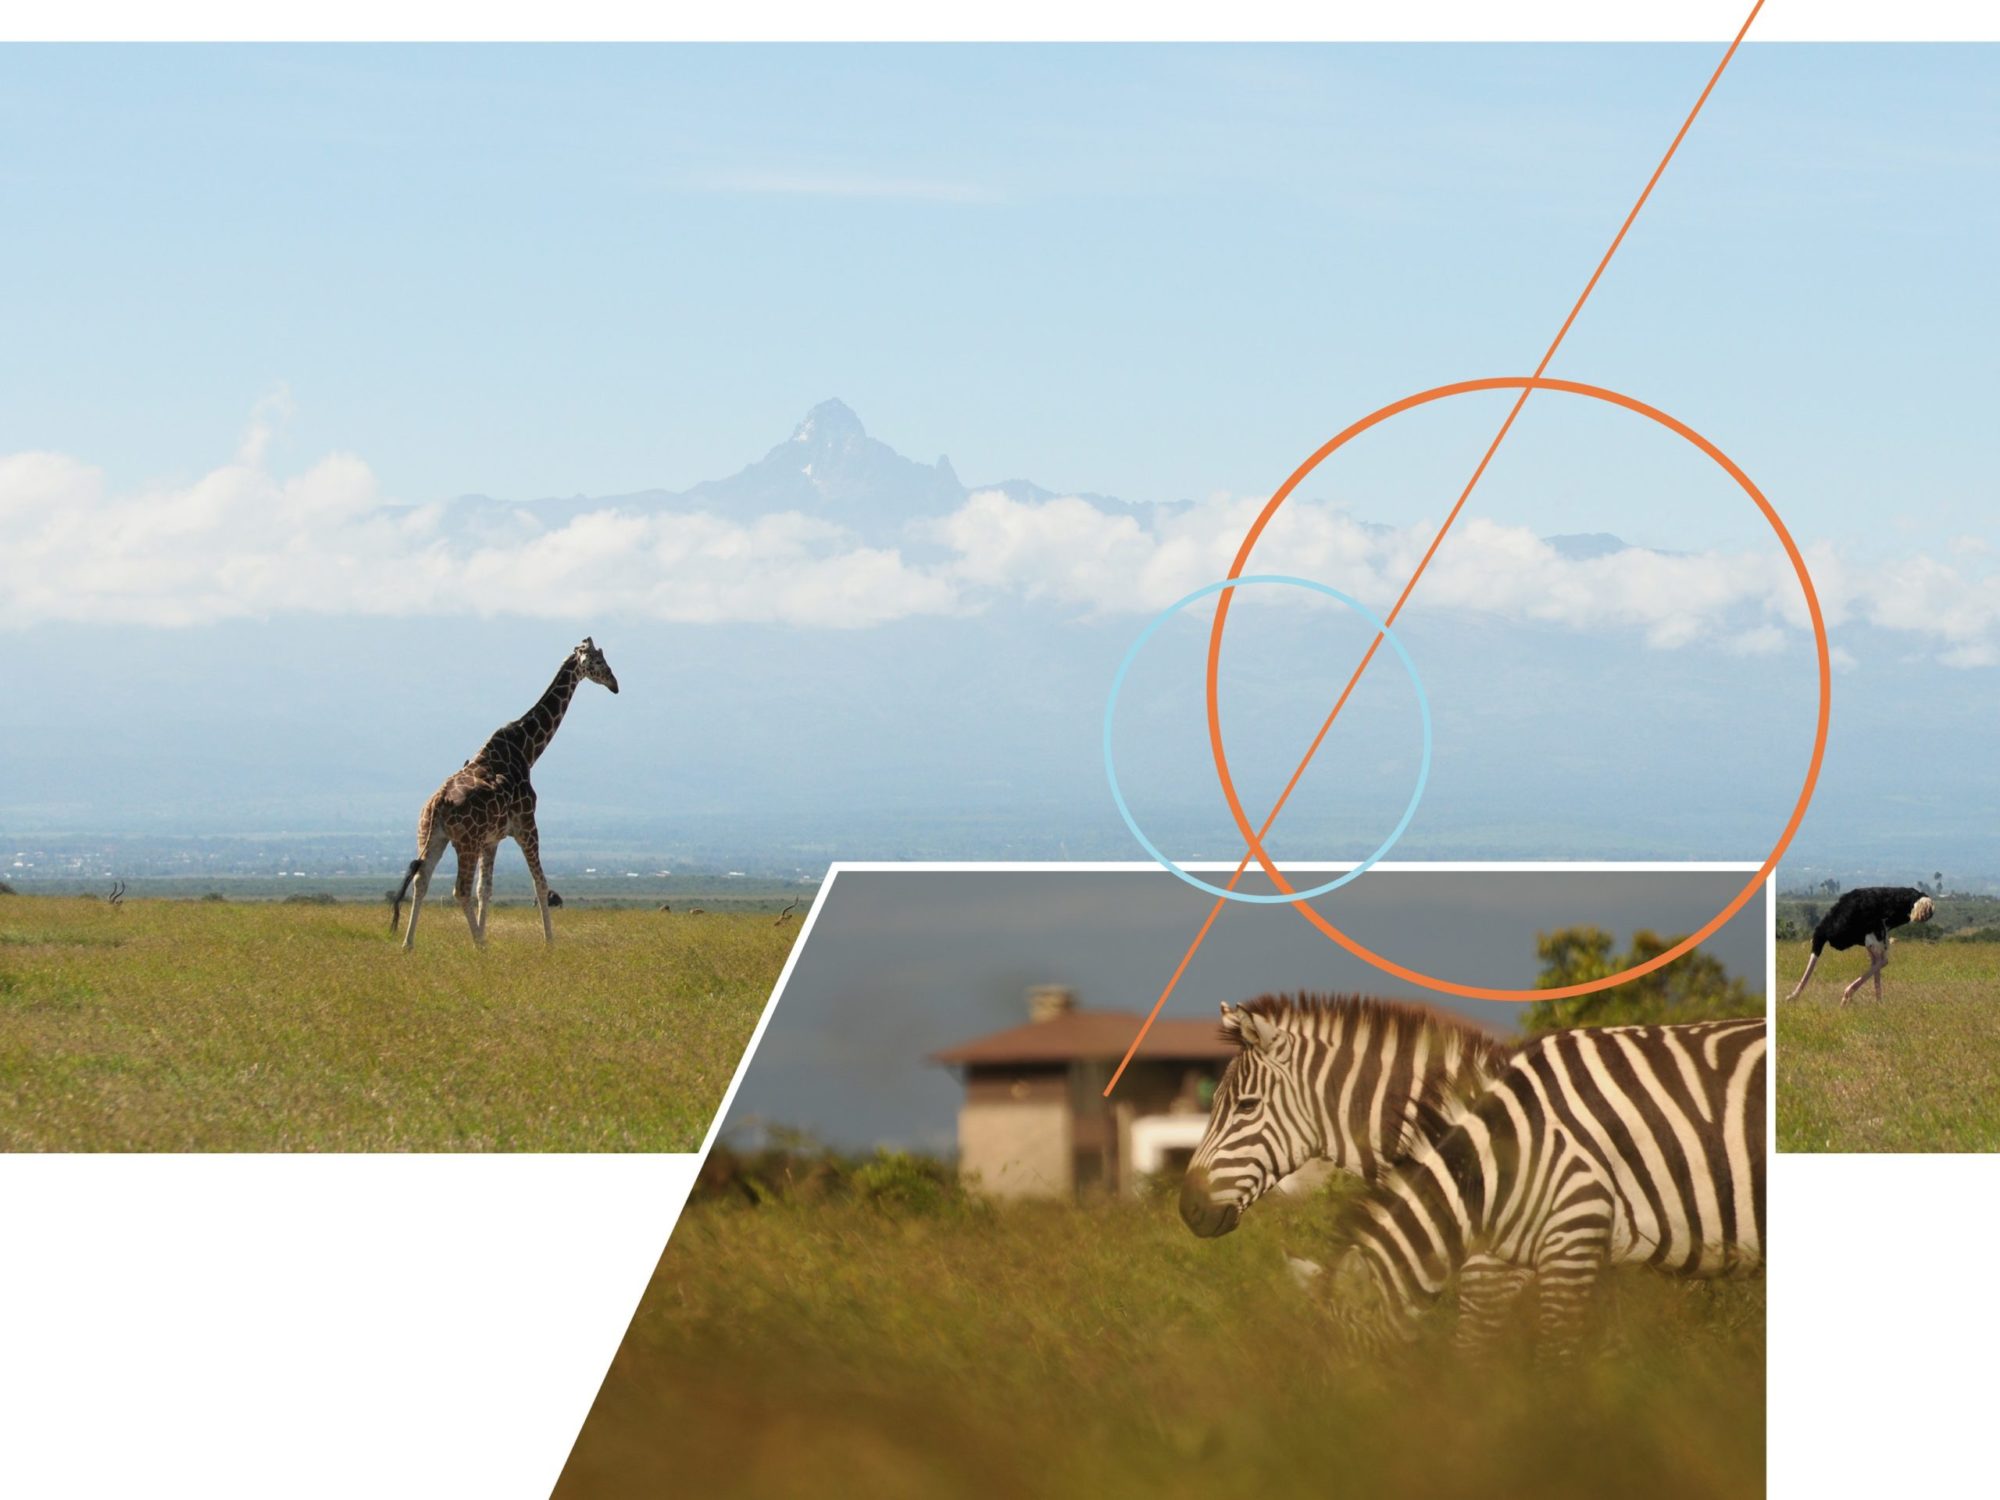 Mount Kenya Wildlife Estate is, located on the vast Ol Pejeta Conservancy, allowing residents to be immersed in Kenya’s tradition of abundant wildlife, right on their doorstep. The estate also offers a viable investment opportunity for a wildlife enthusiast looking for a settled lifestyle in the African bush.